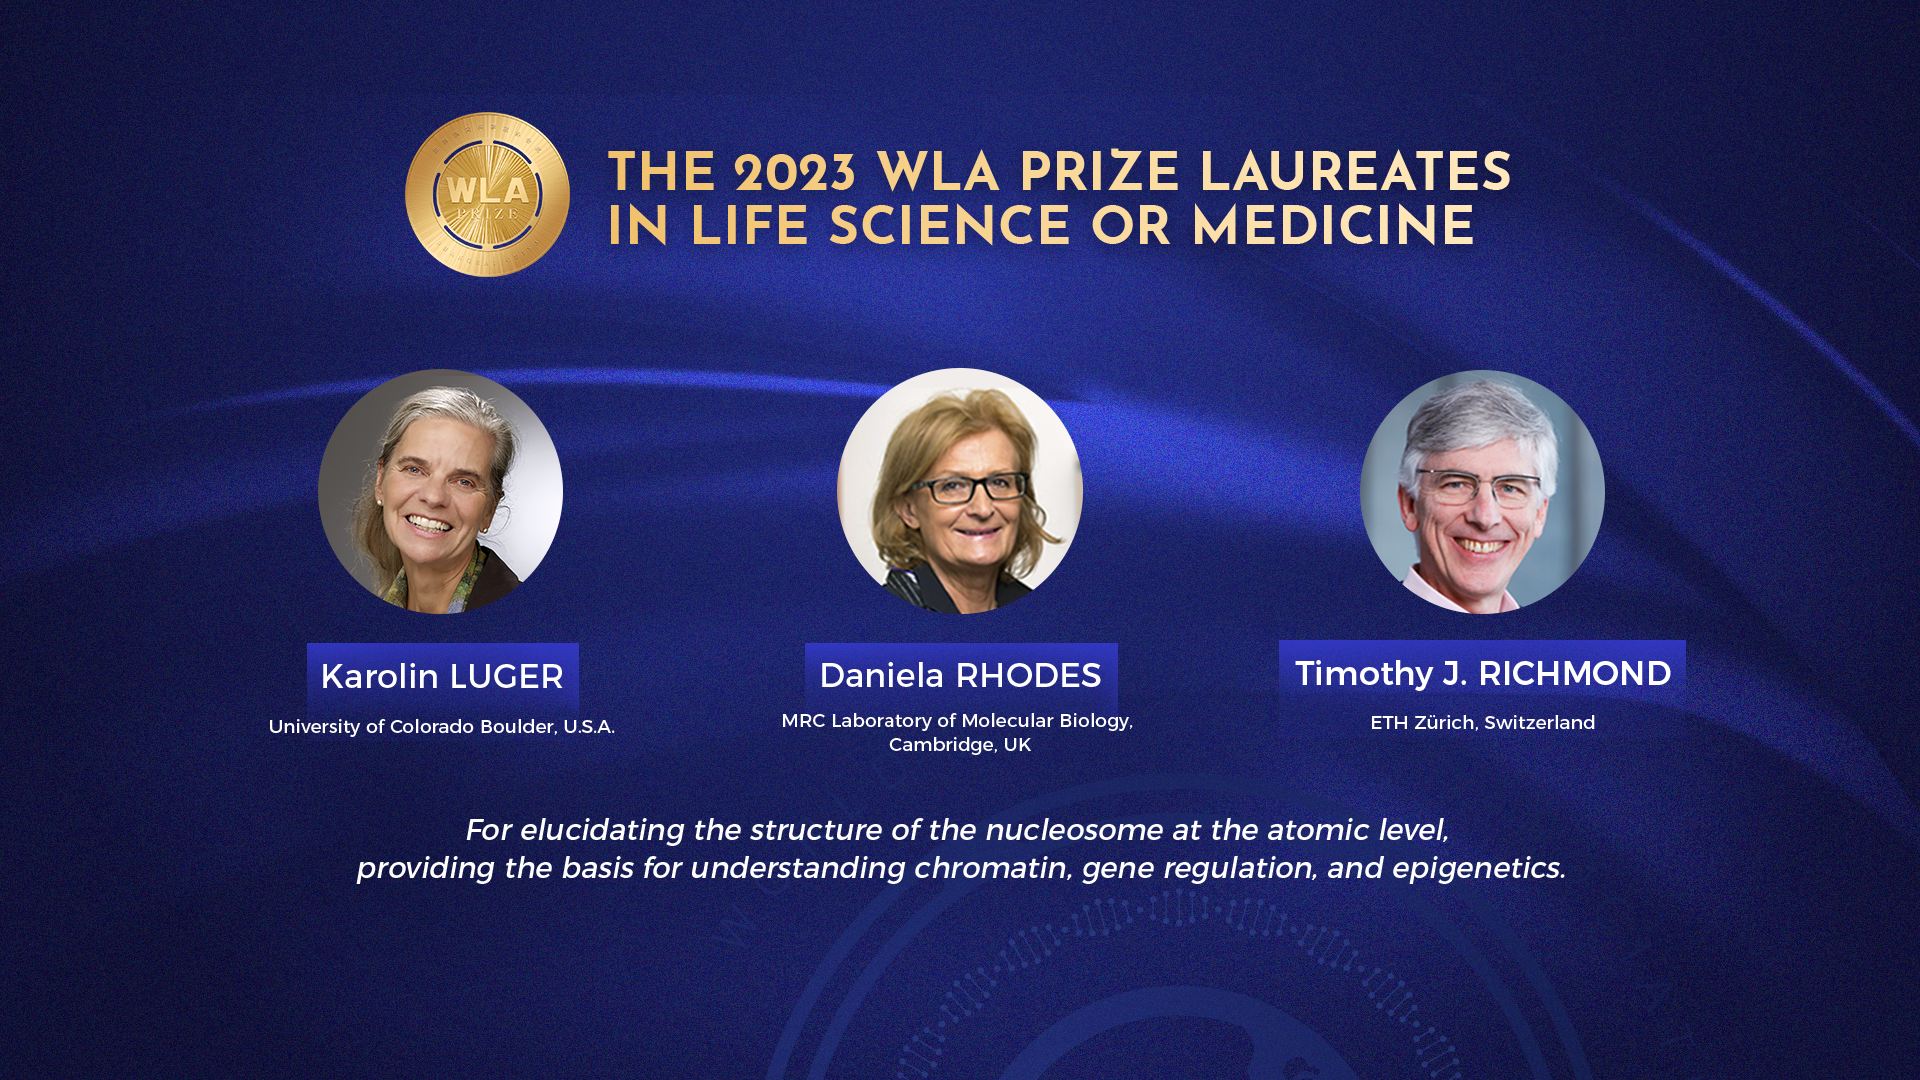 The 2023 WLA Prize in Life Science or Medicine recognizes three scientists: Daniela Rhodes, Karolin Luger and Timothy J. Richmond